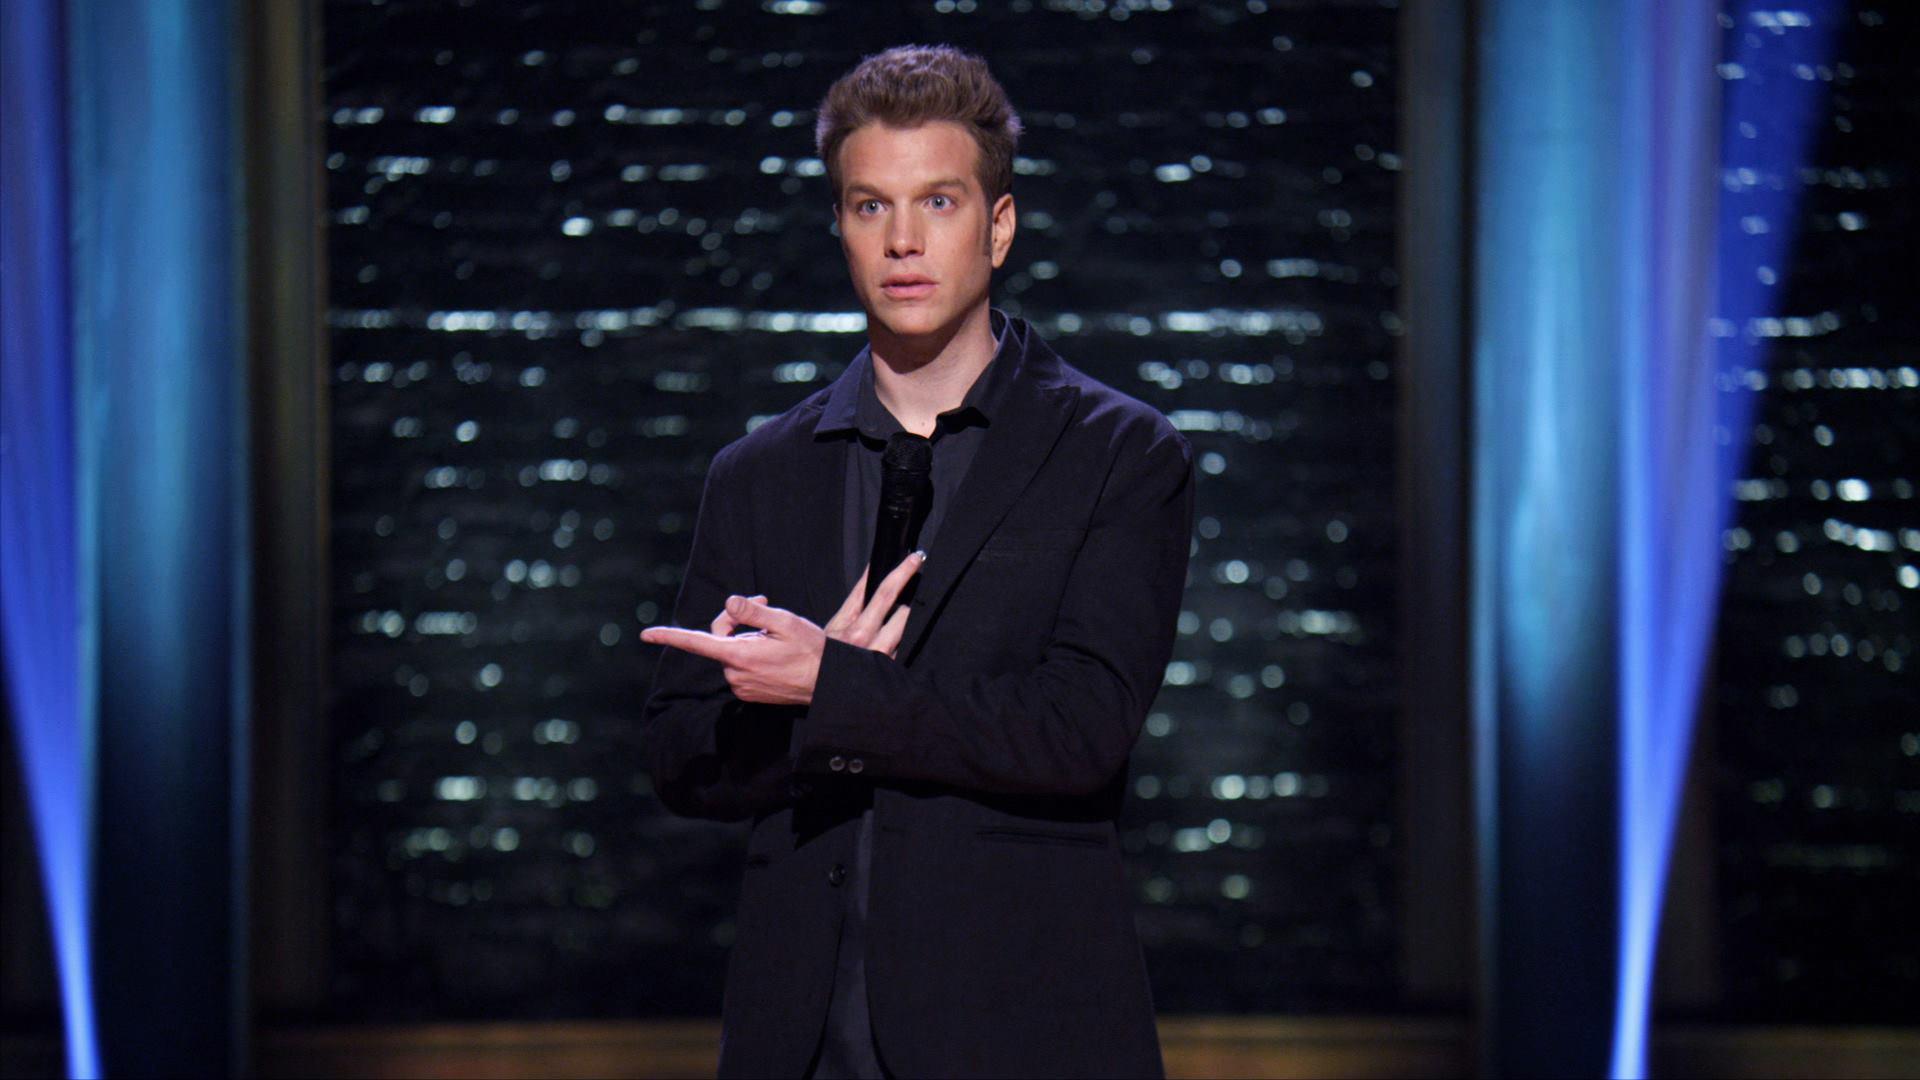 facebook.comComedian Anthony Jeselnik didn’t hold back any punches when performing at Weill Hall, making sure every student and audience member got theirs.